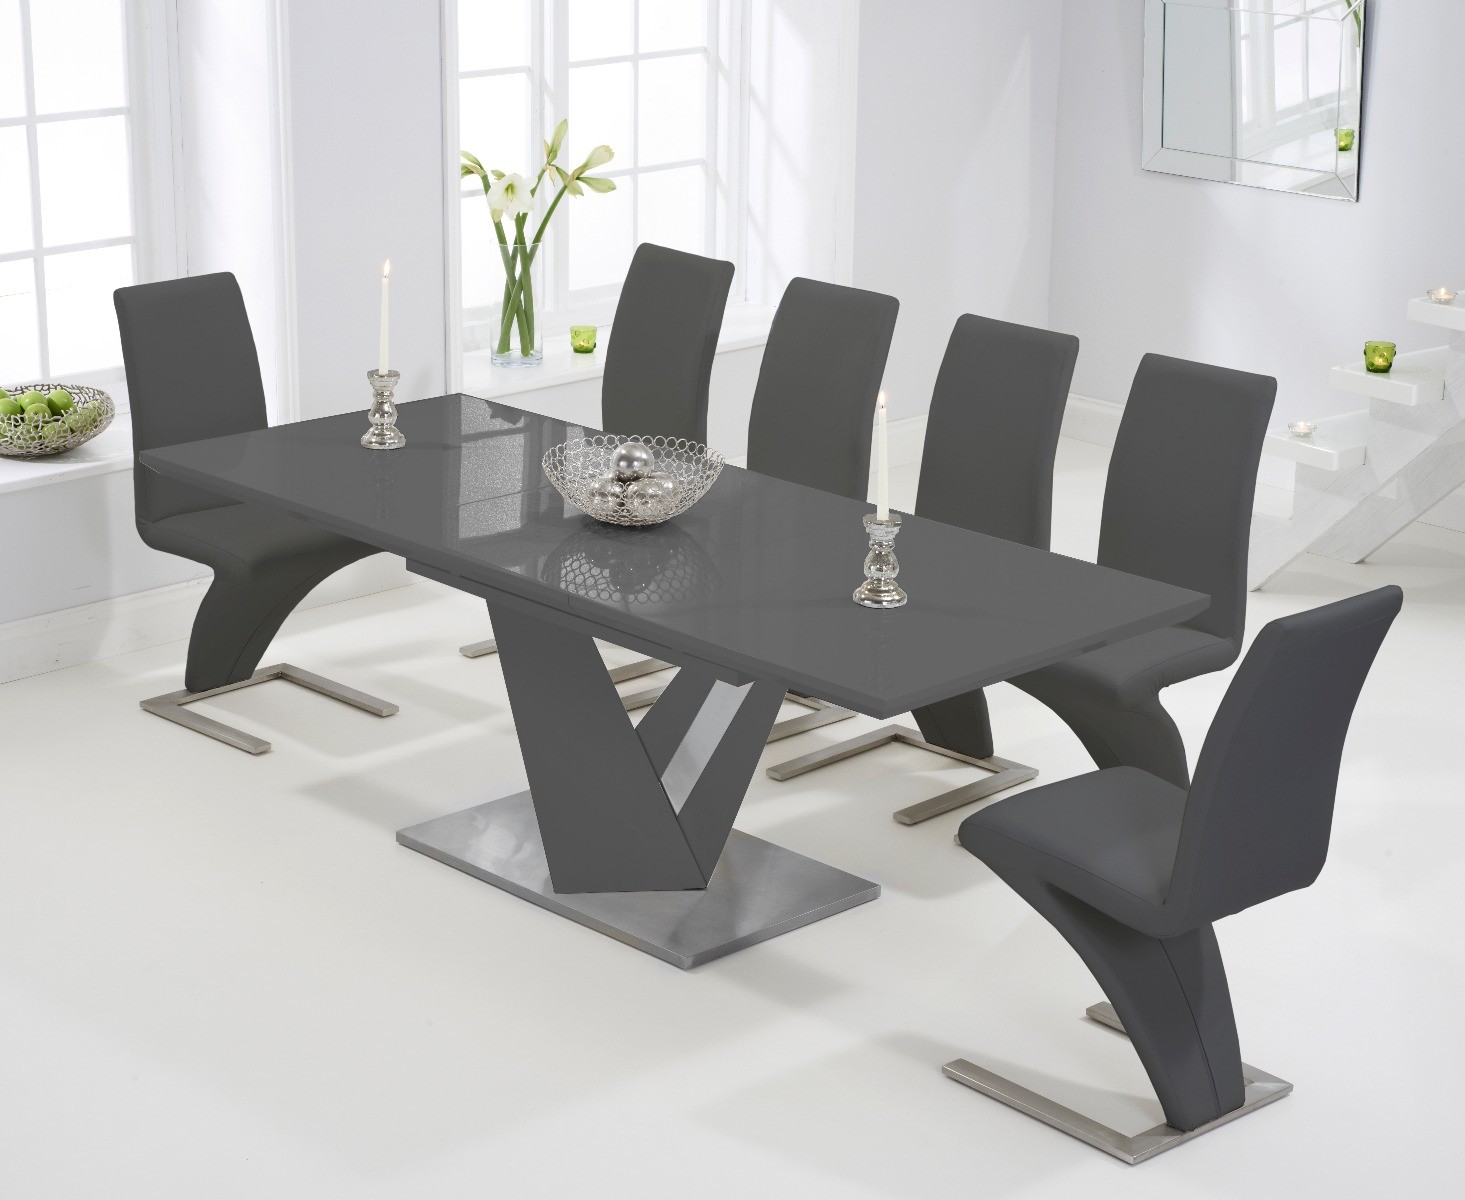 Harmony 160cm Extending Dark Grey High, Black High Gloss Dining Table And Chairs